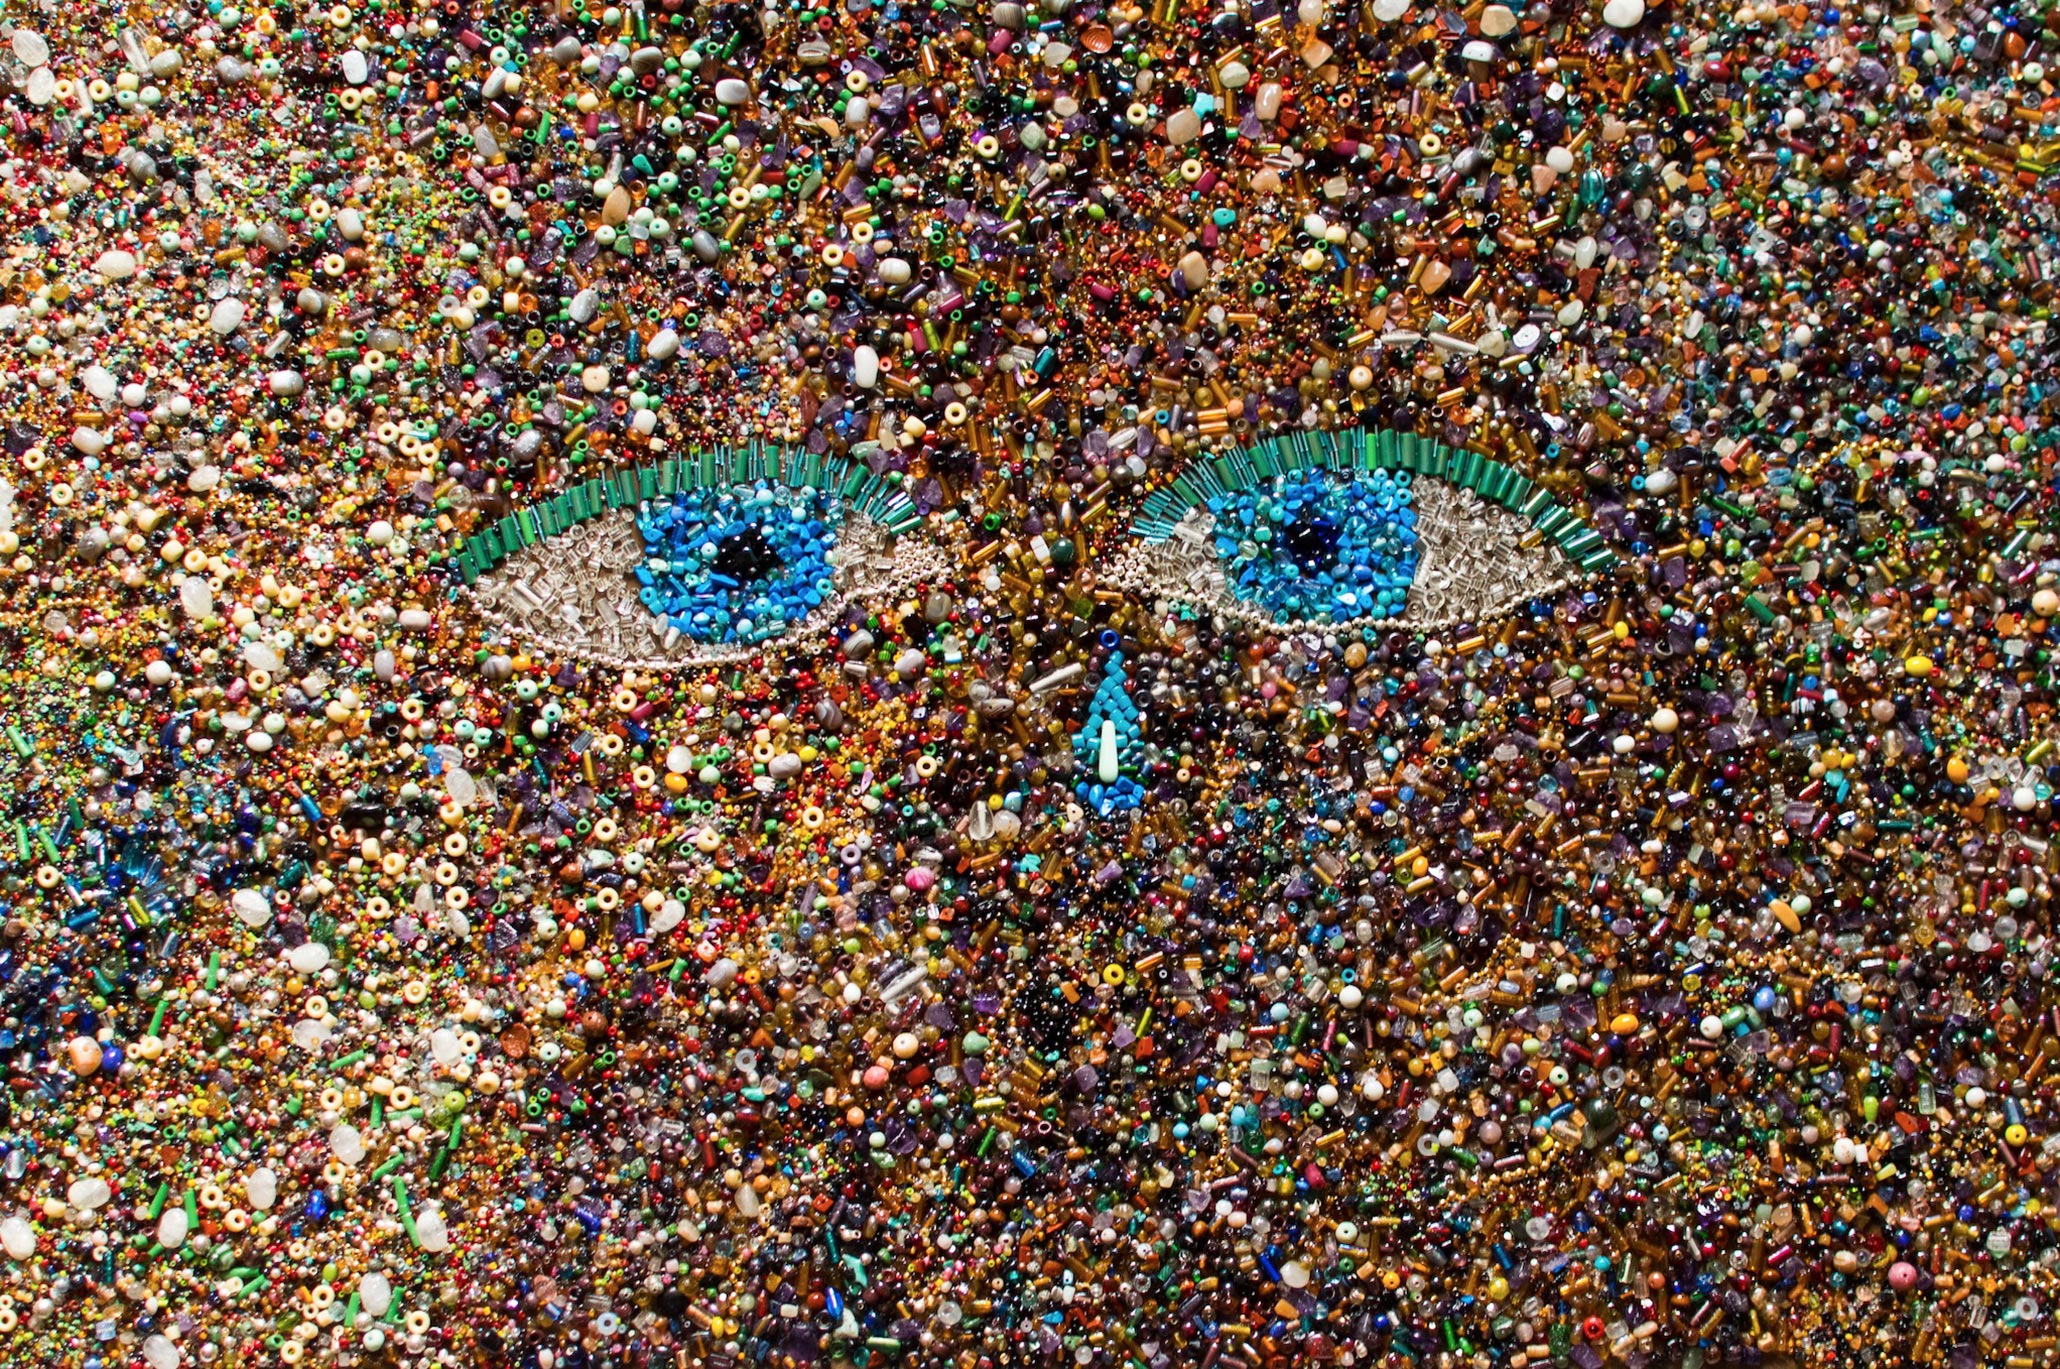 Multimedia textural image of blue eyes staring back at the viewer.